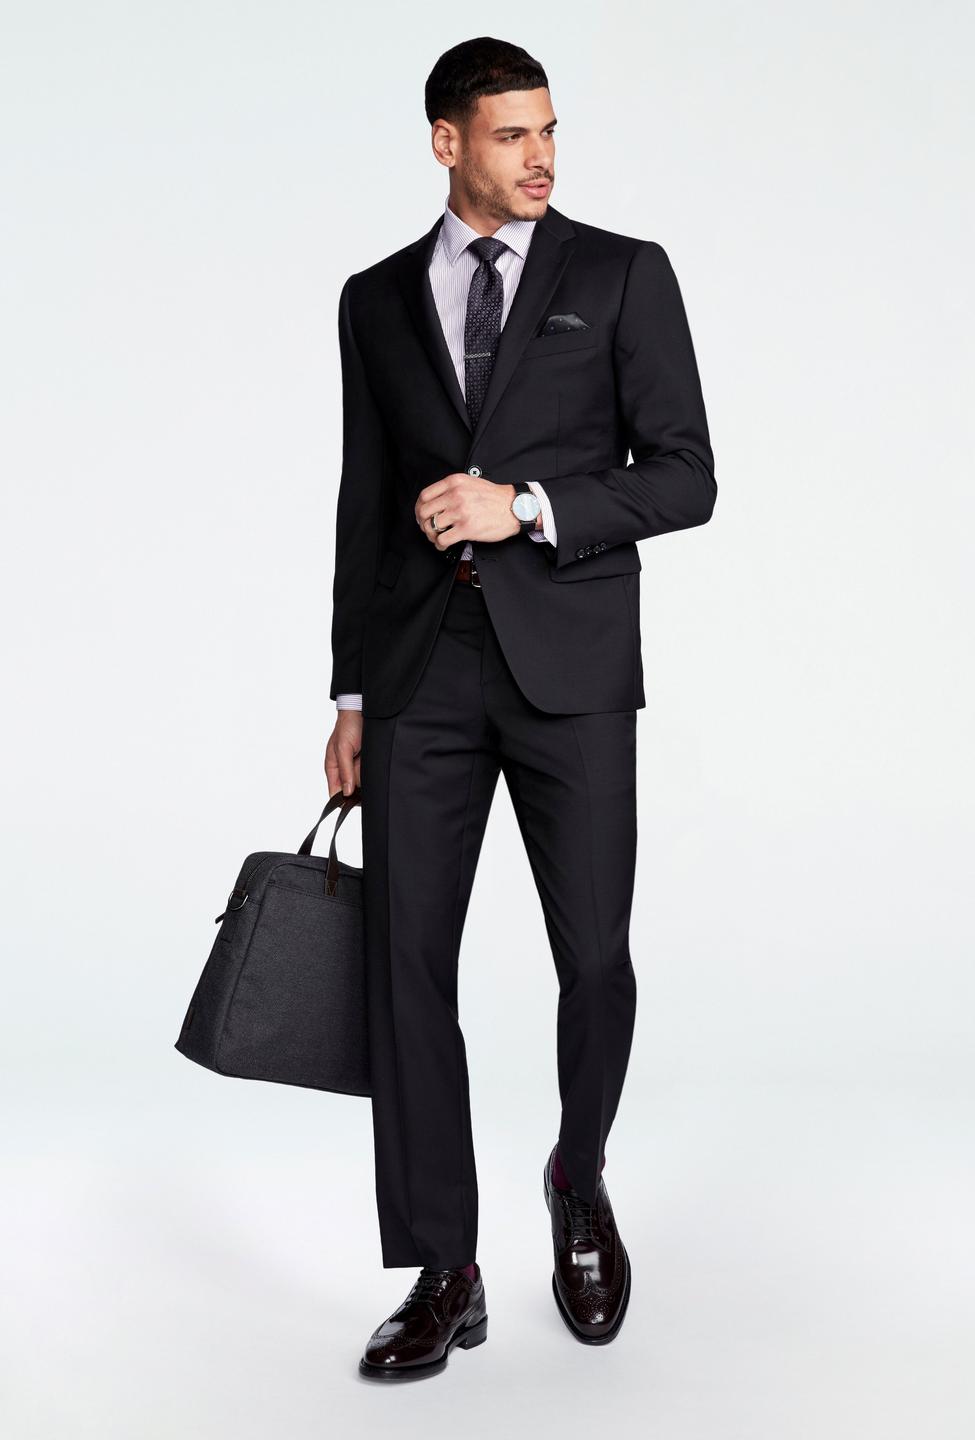 Black suit - Hemsworth Solid Design from Premium Indochino Collection